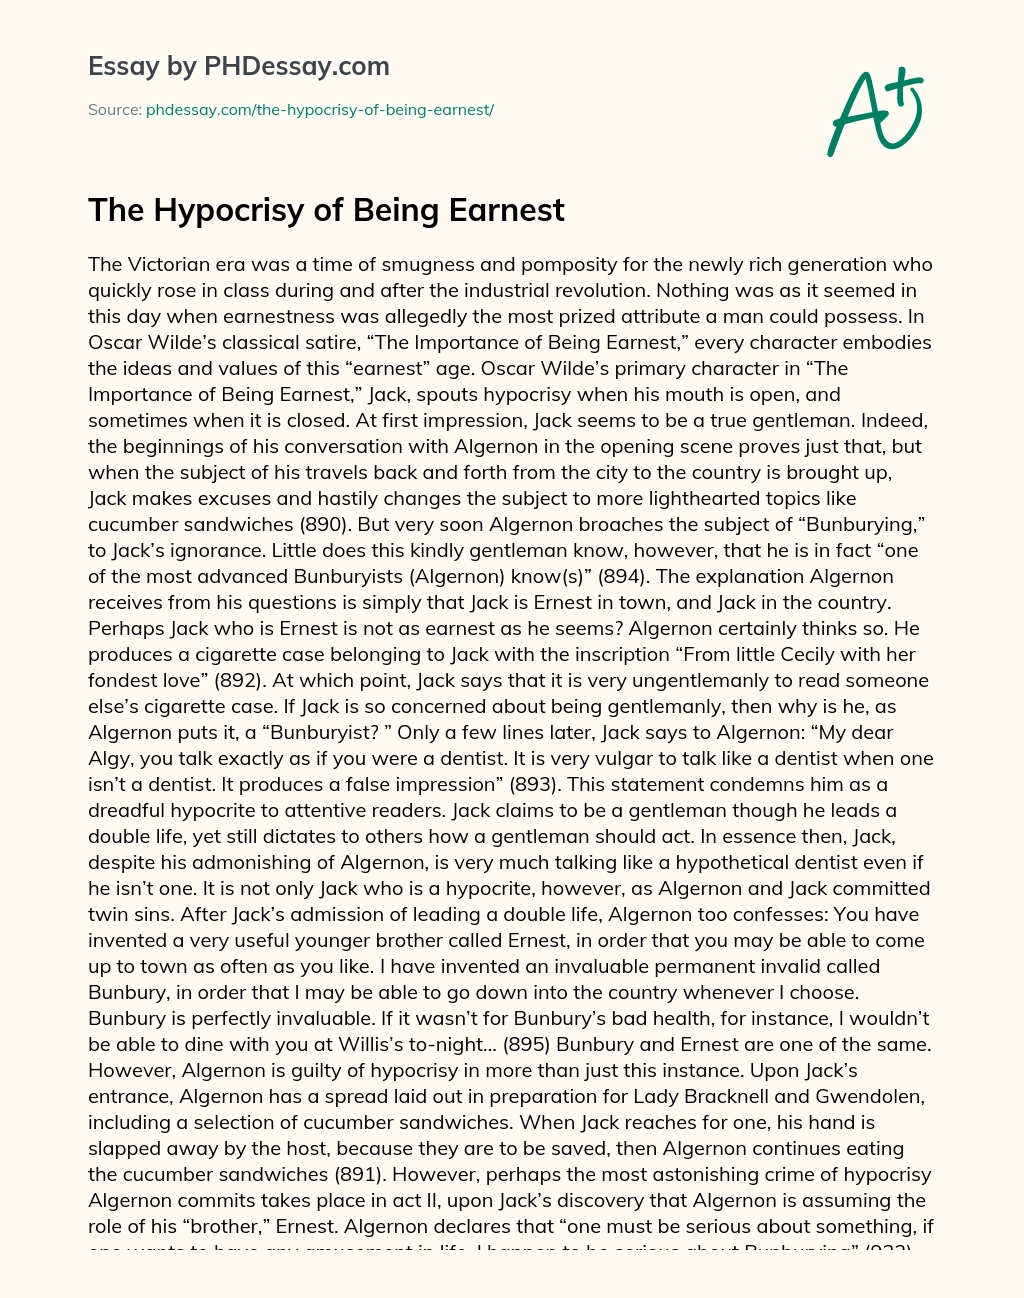 The Hypocrisy of Being Earnest essay